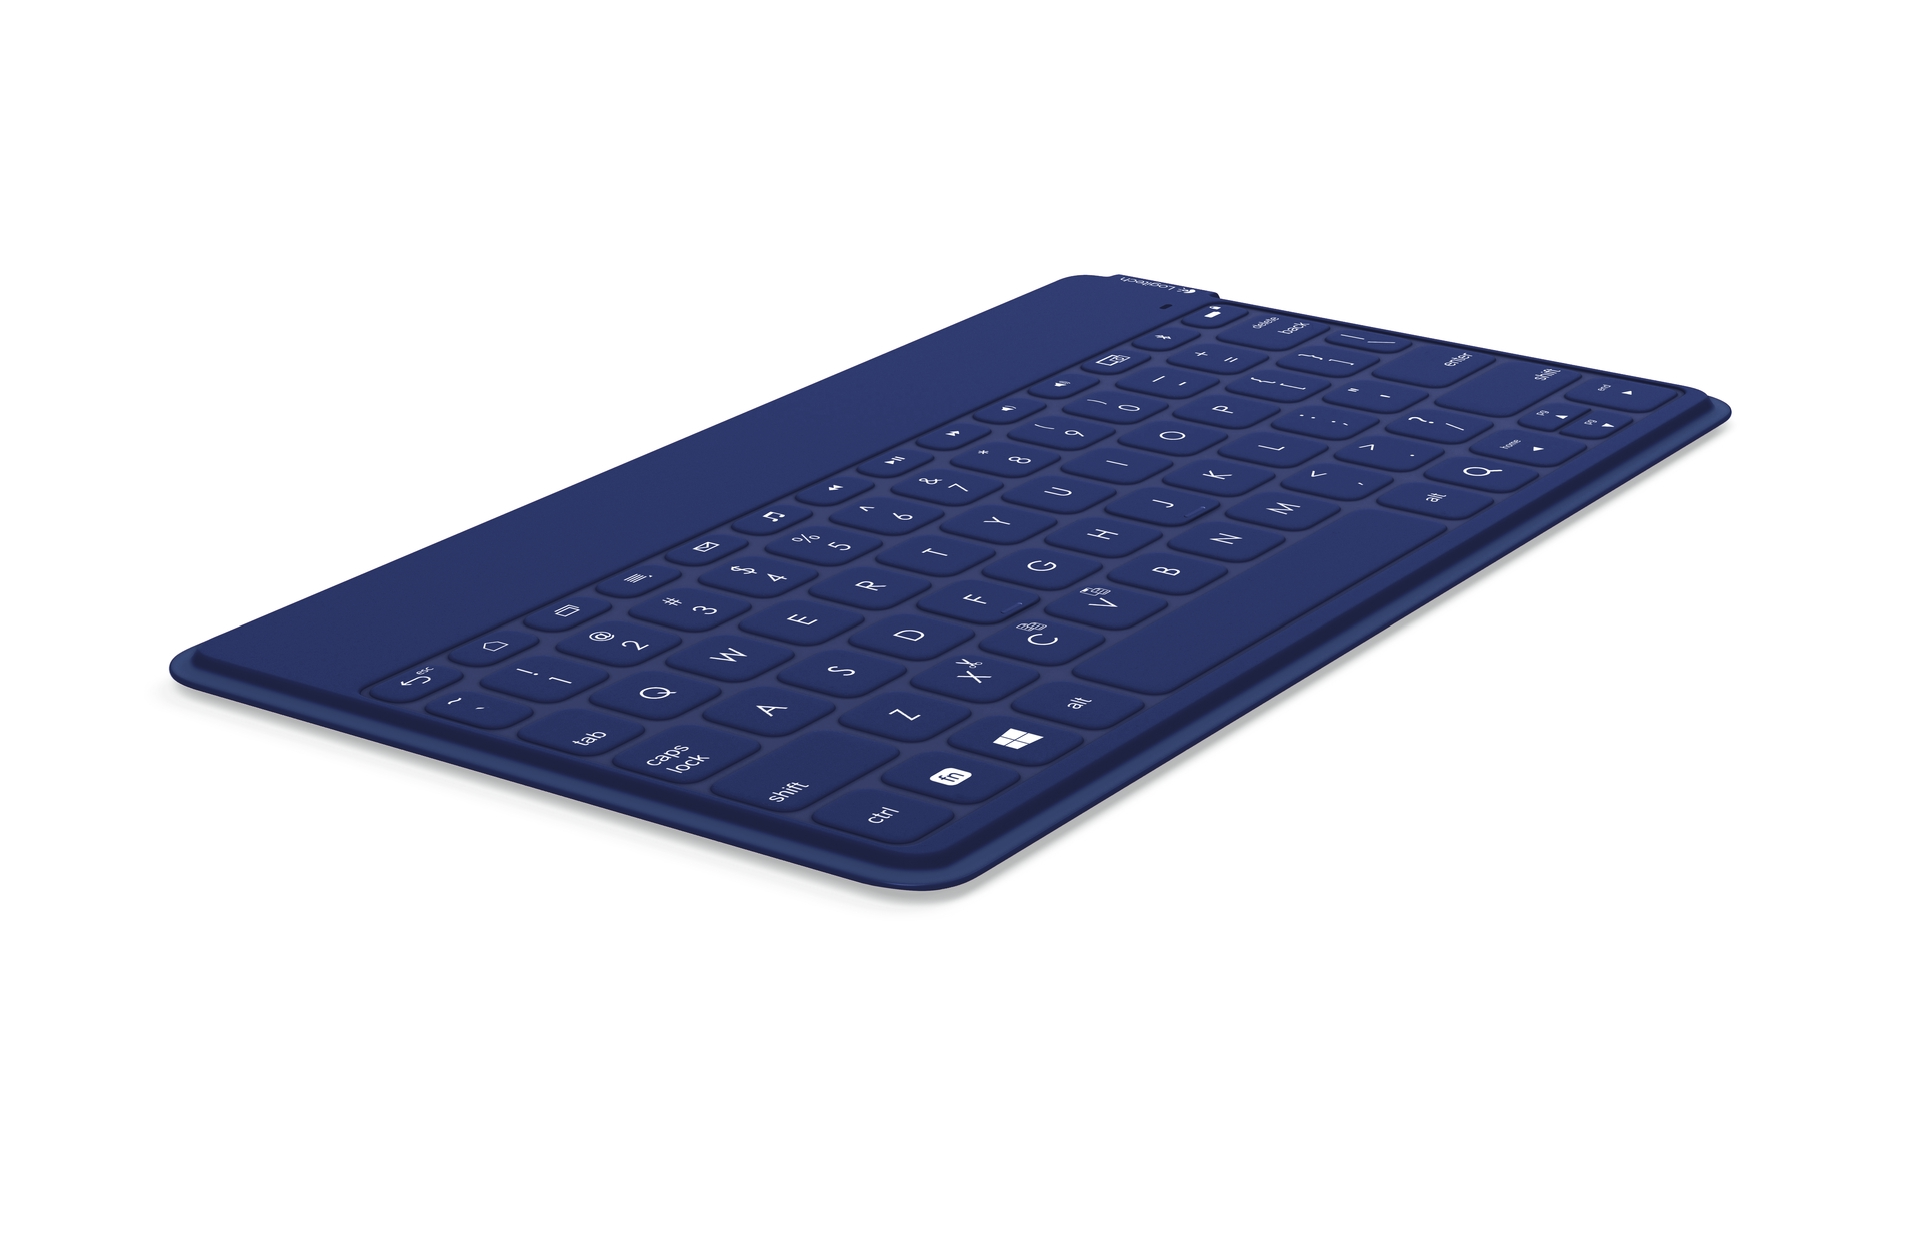 Review: Logitech Keys-To-Go mobile keyboard is an excellent alternative for mobile professionals